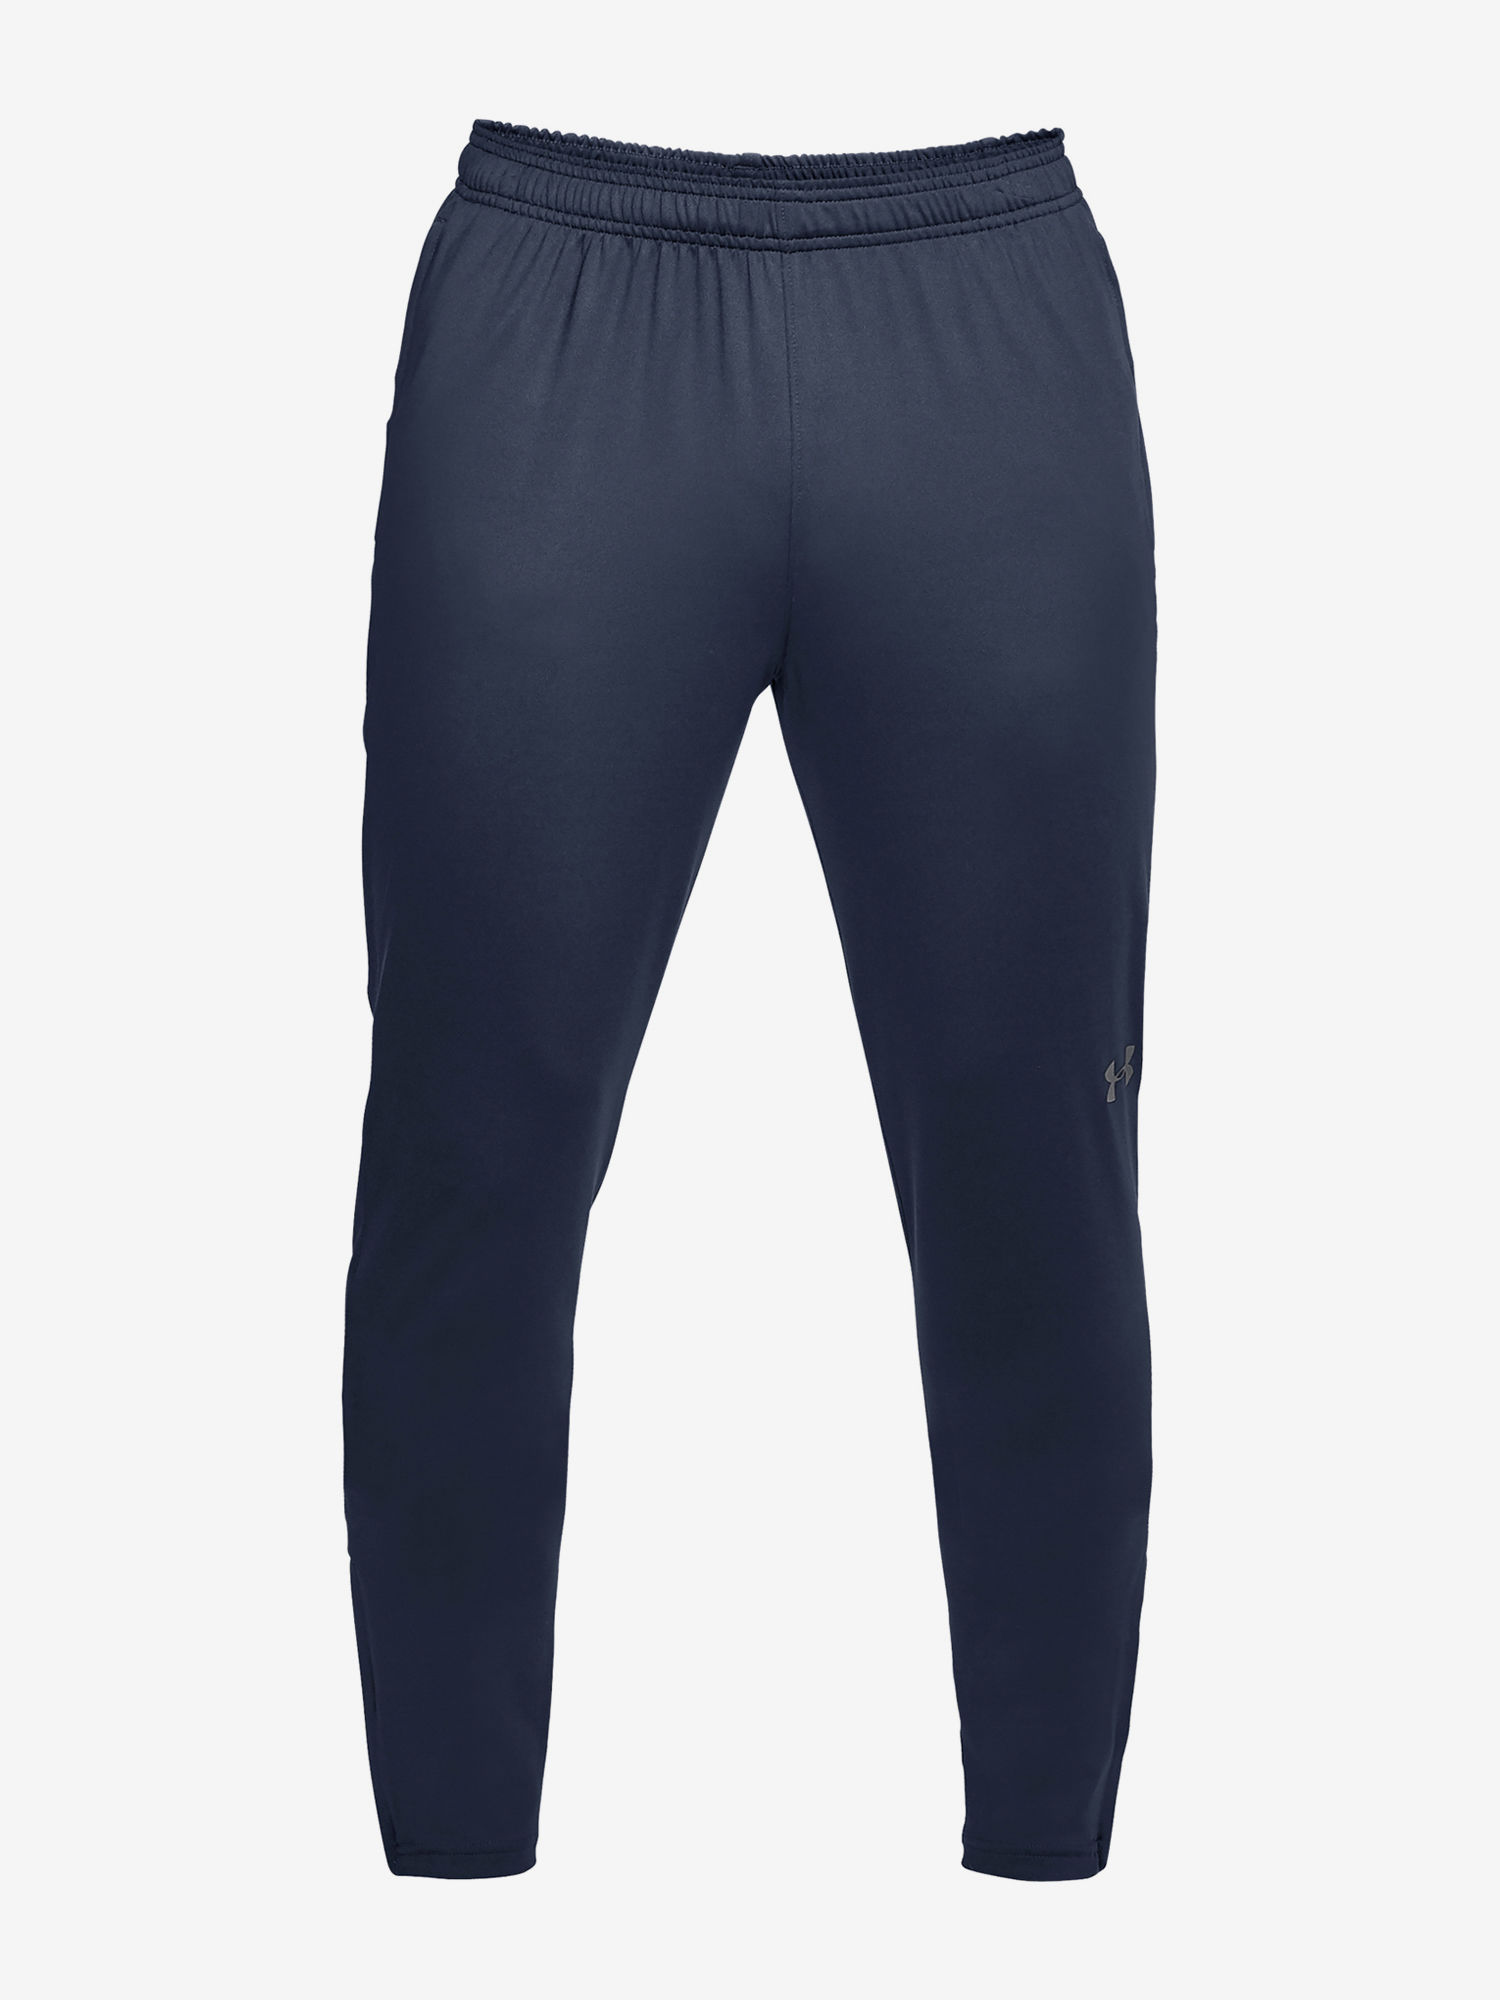 Tepláky Under Armour Challenger II Training Pant-NVY (3)